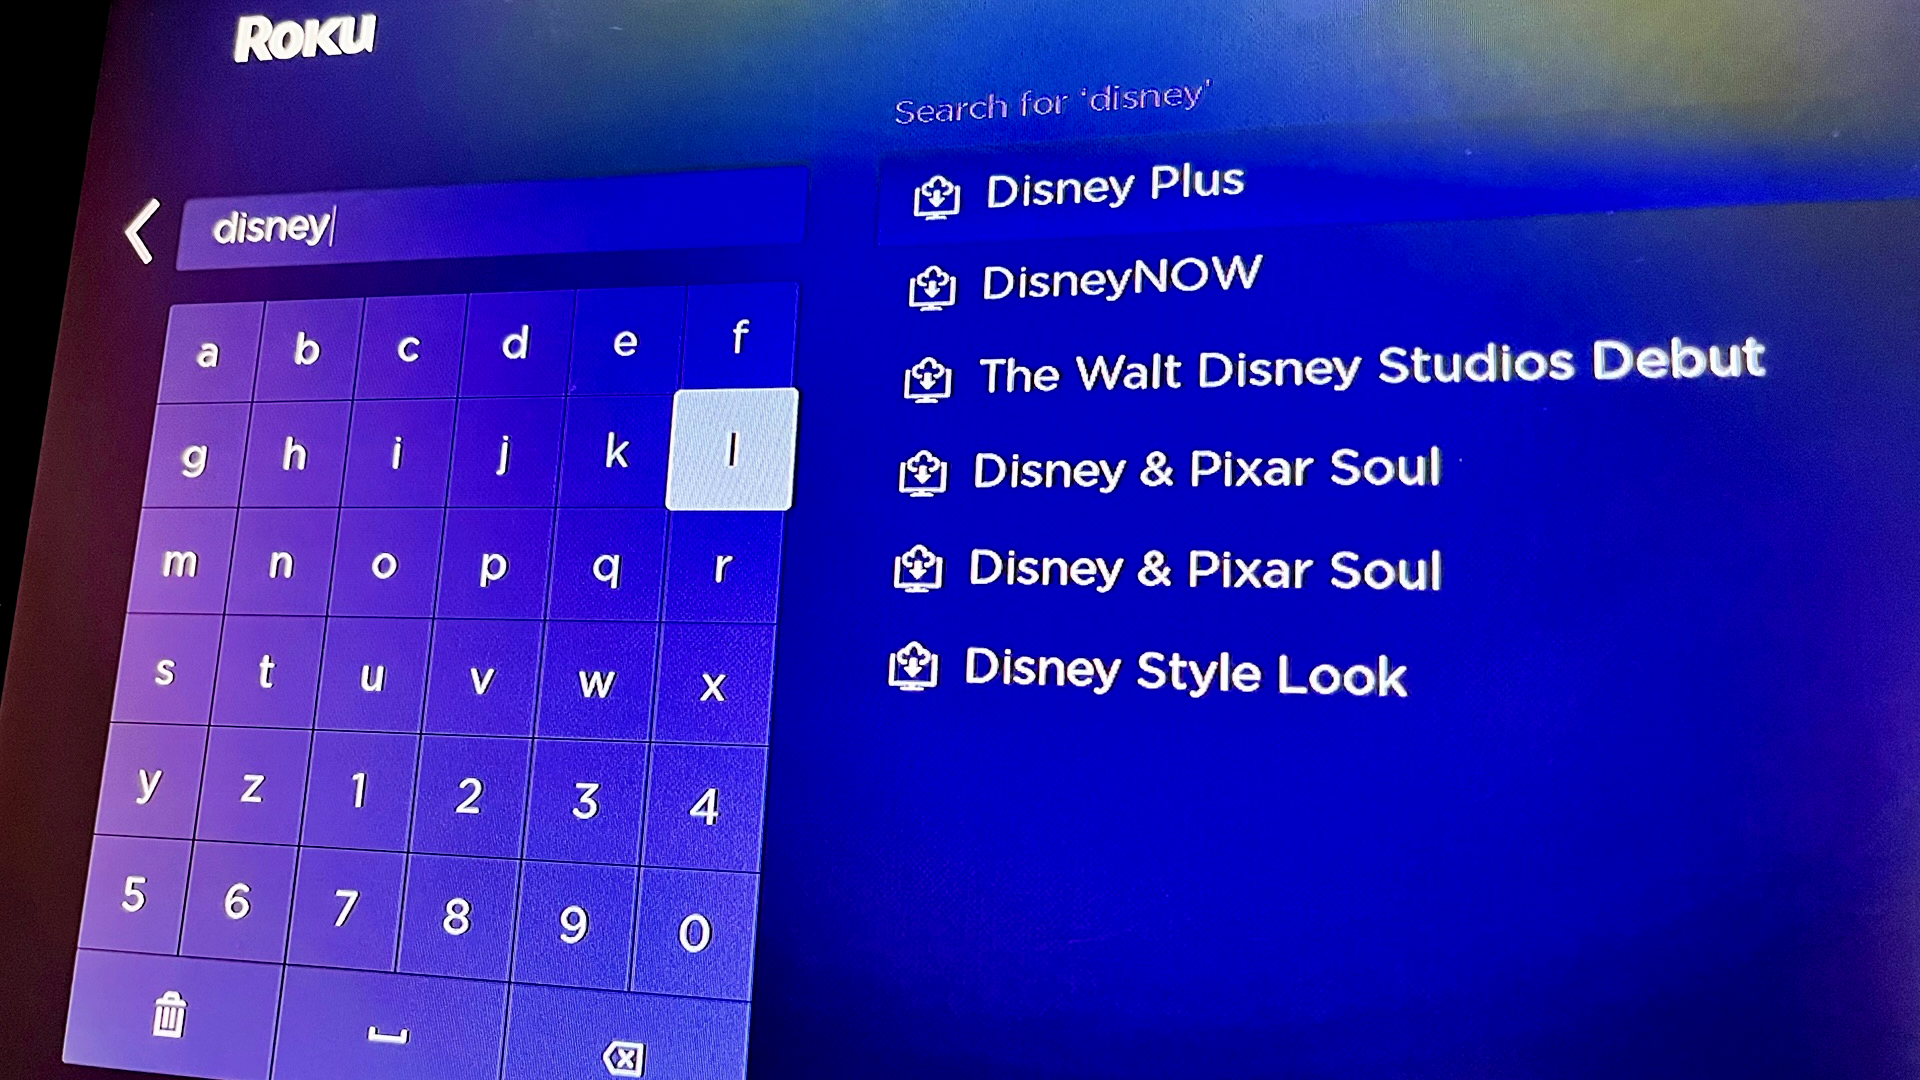 Searching for Disney Plus on Roku